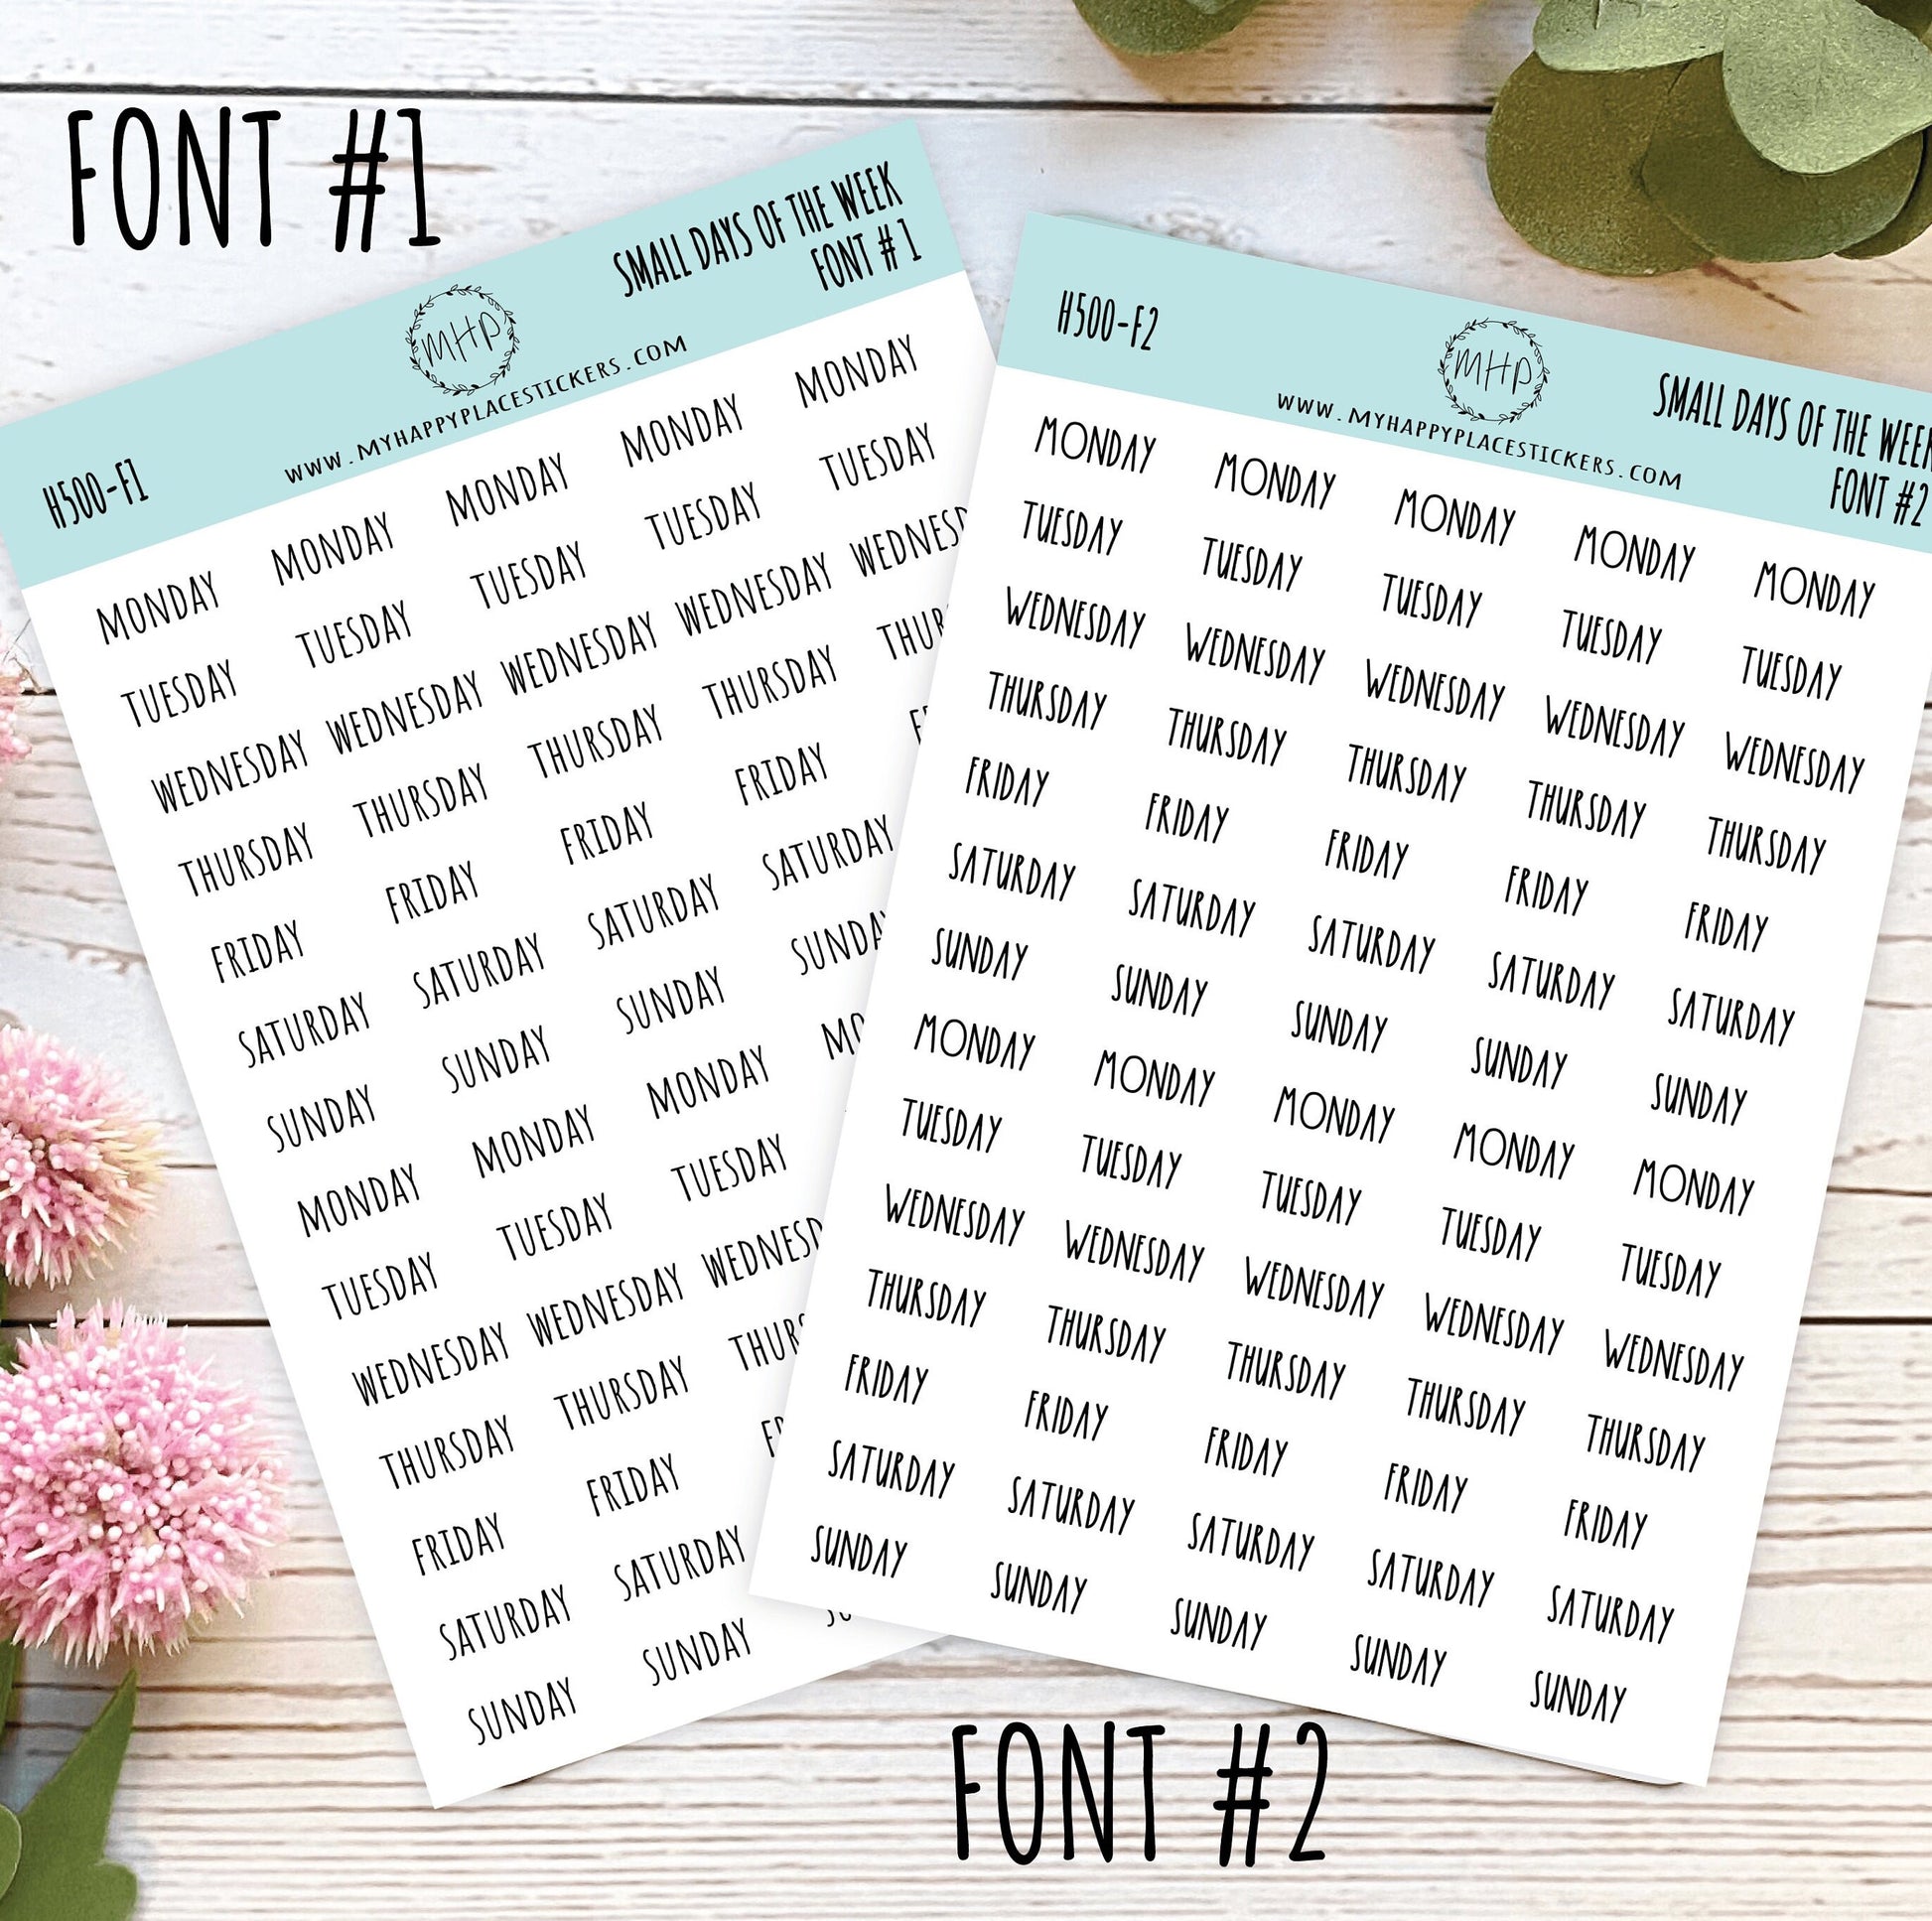 Mini Days of the Week - Font 3 – Little Linda Stickers